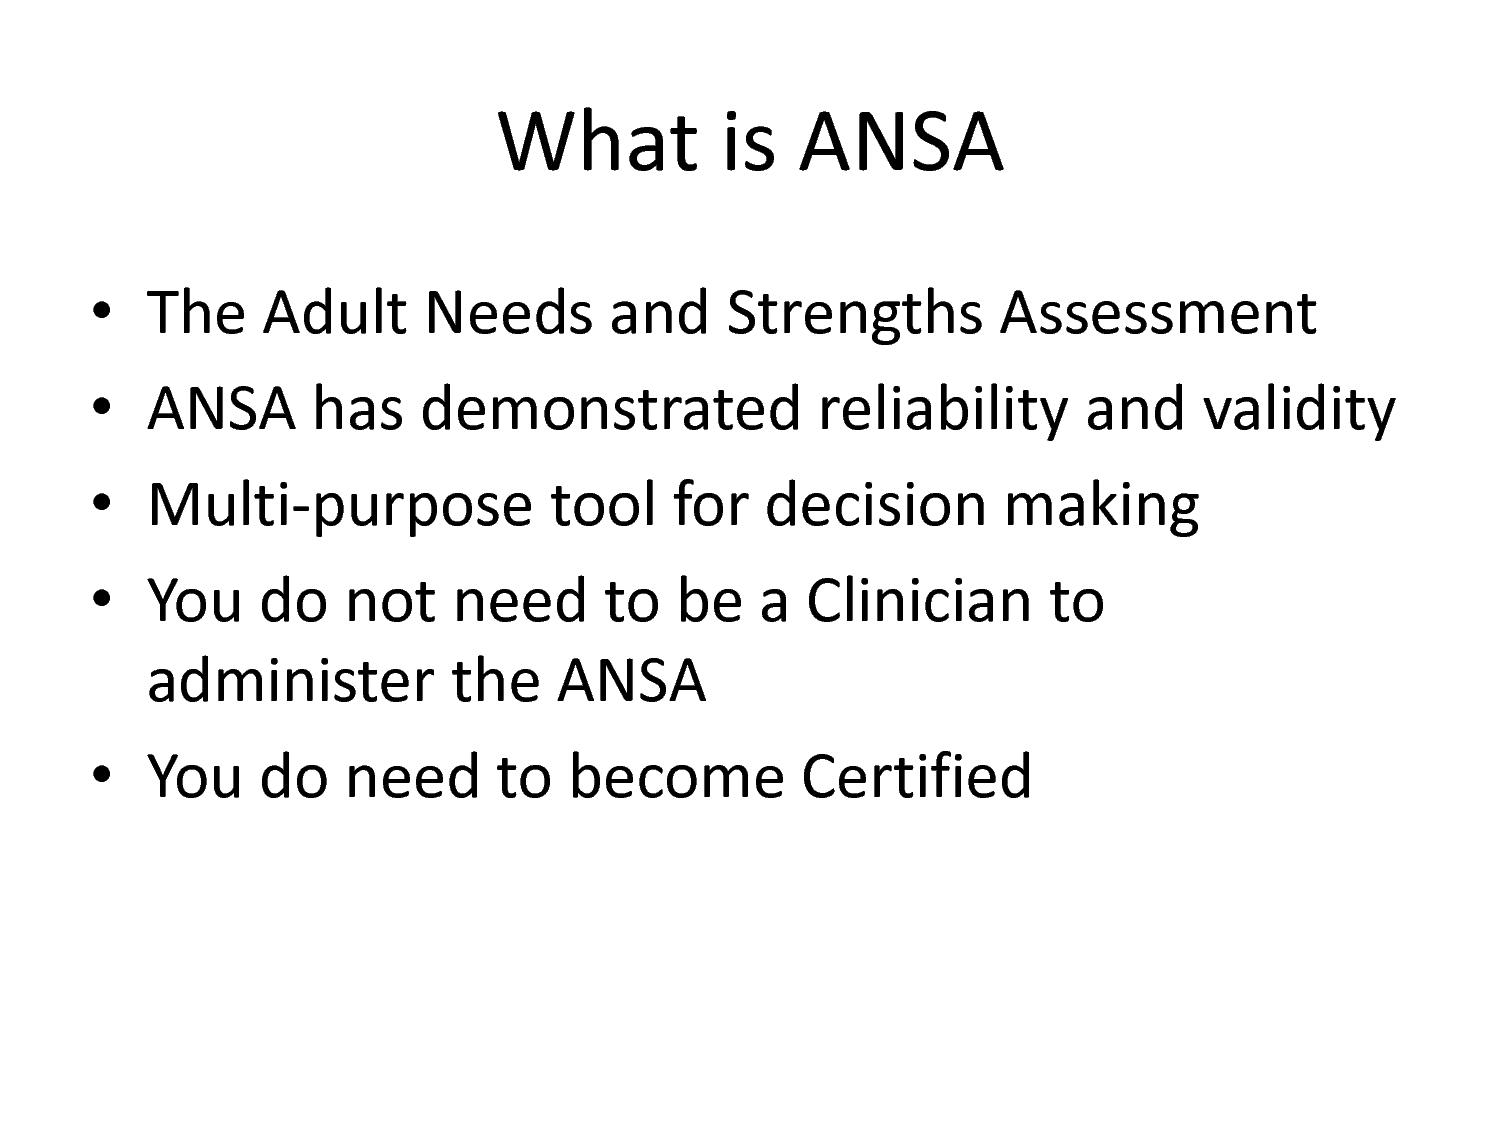  The Adult Needs and Strengths Assessmen